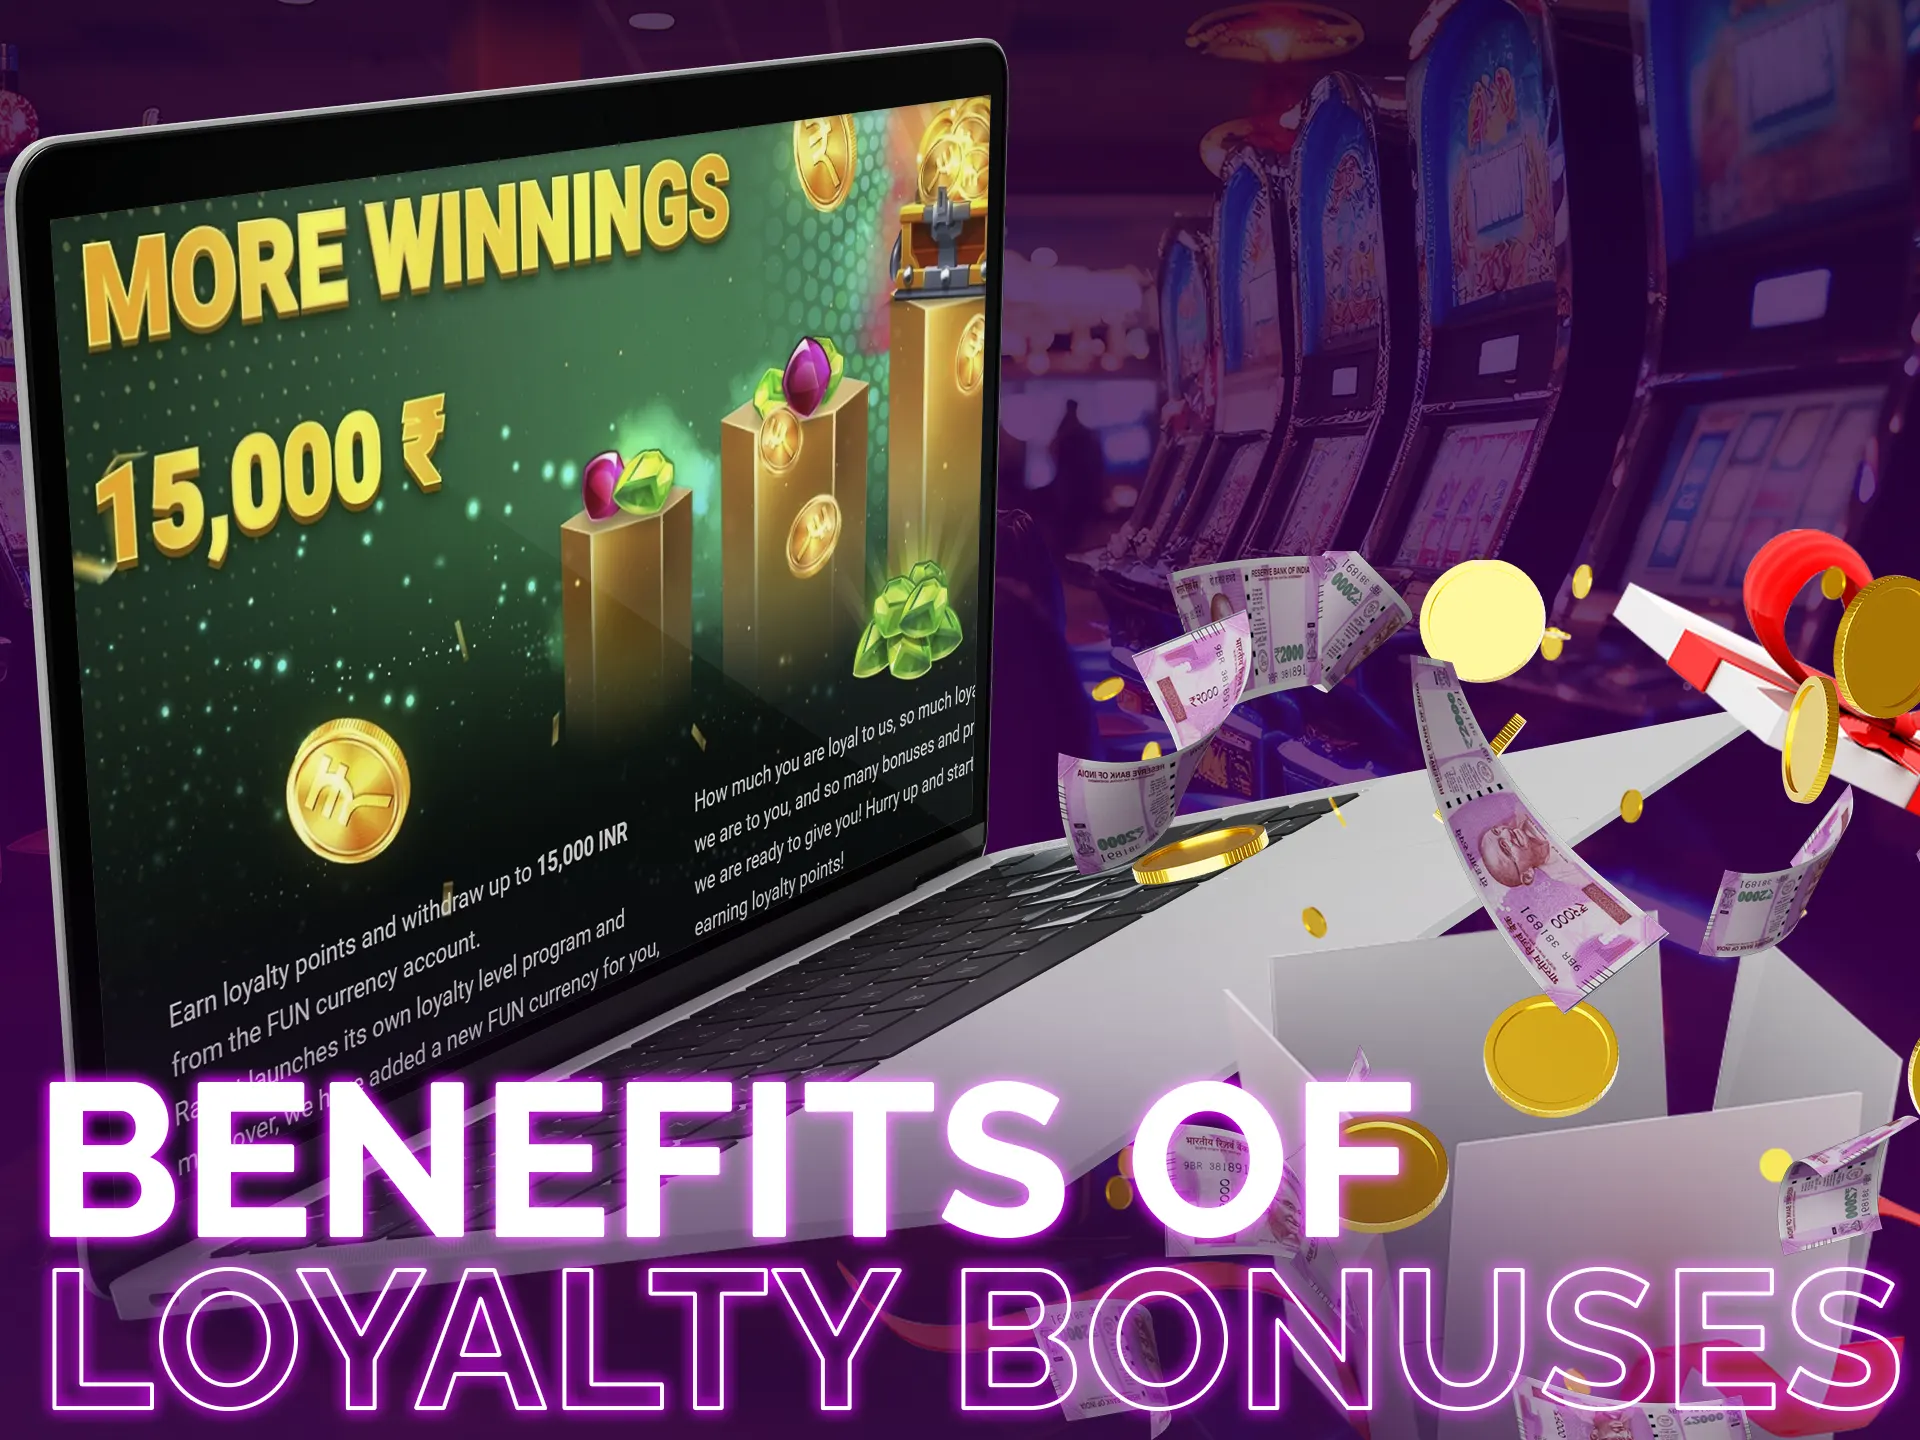 Learn about amazing benefits of loyalty bonuses.